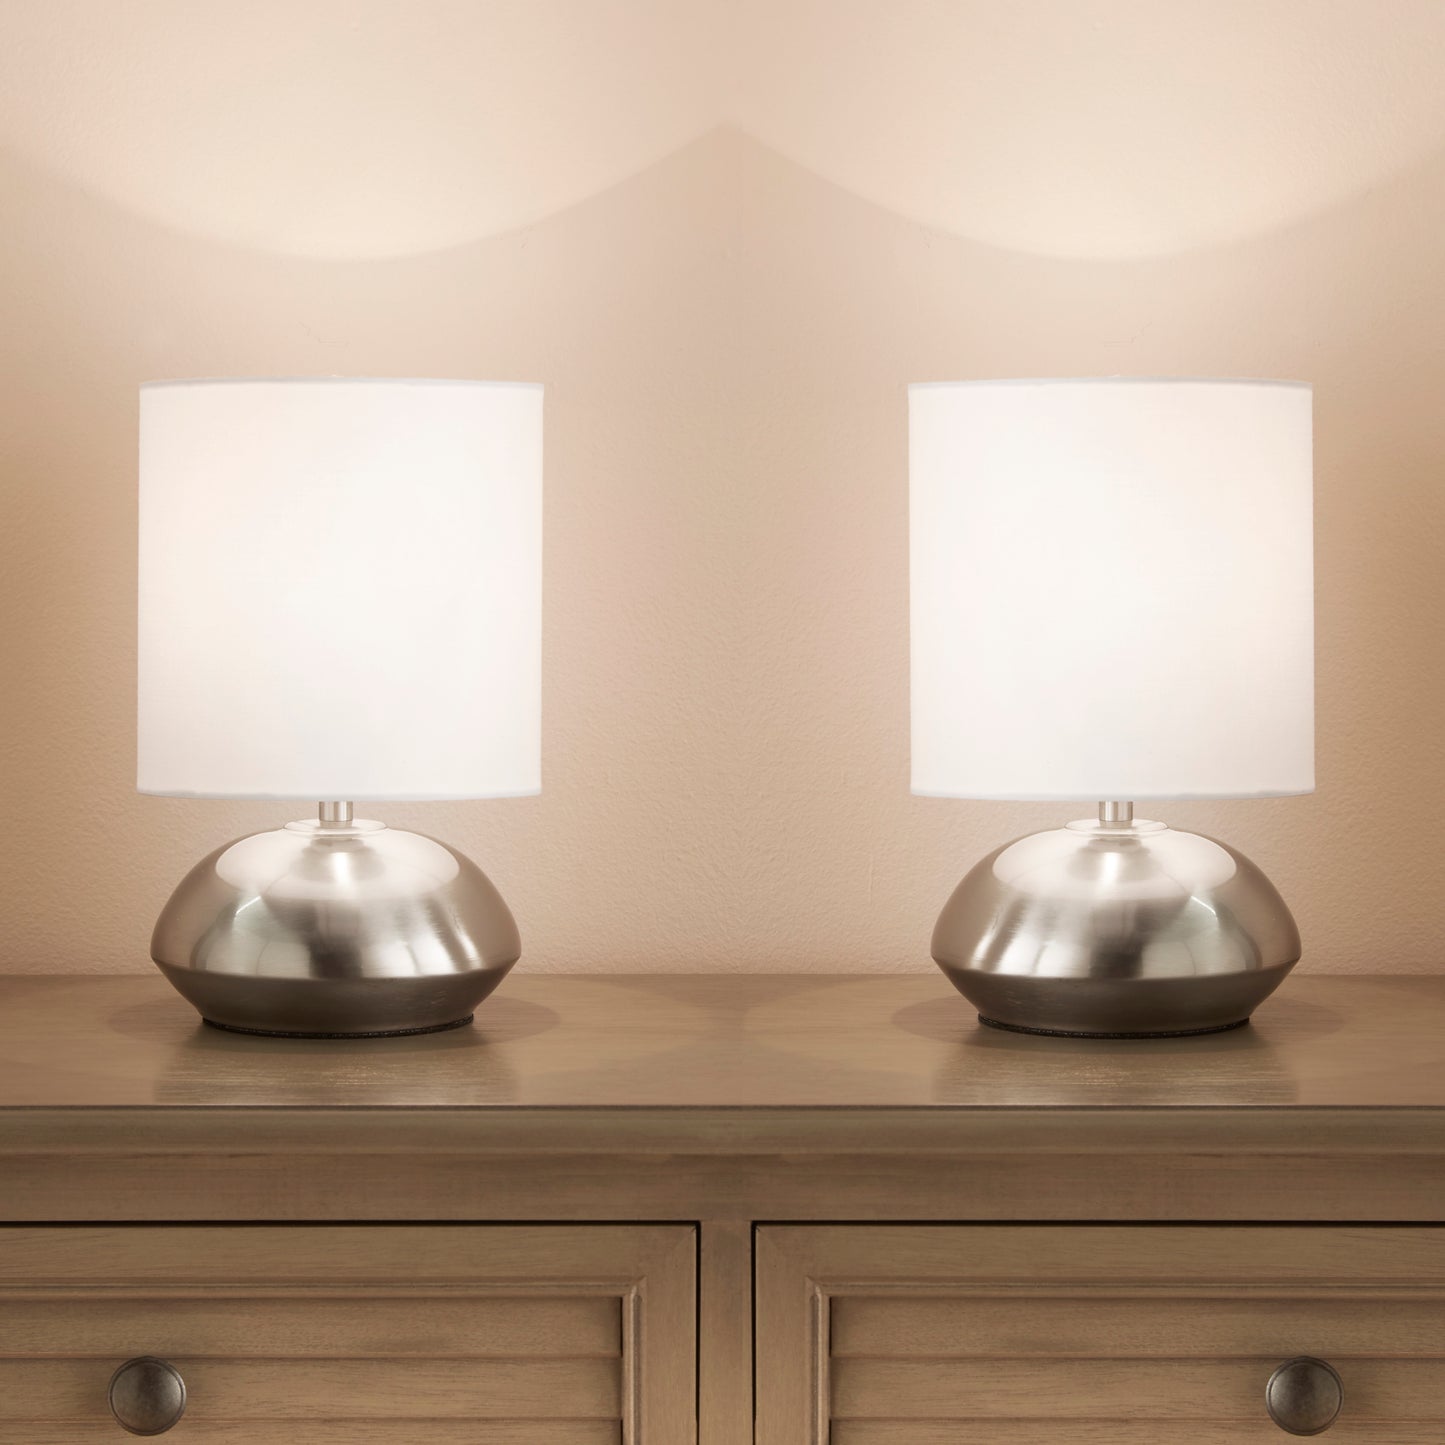 Silver Chrome Pair of Touch Lamps with White Lamp shade and Stepped Dimming options